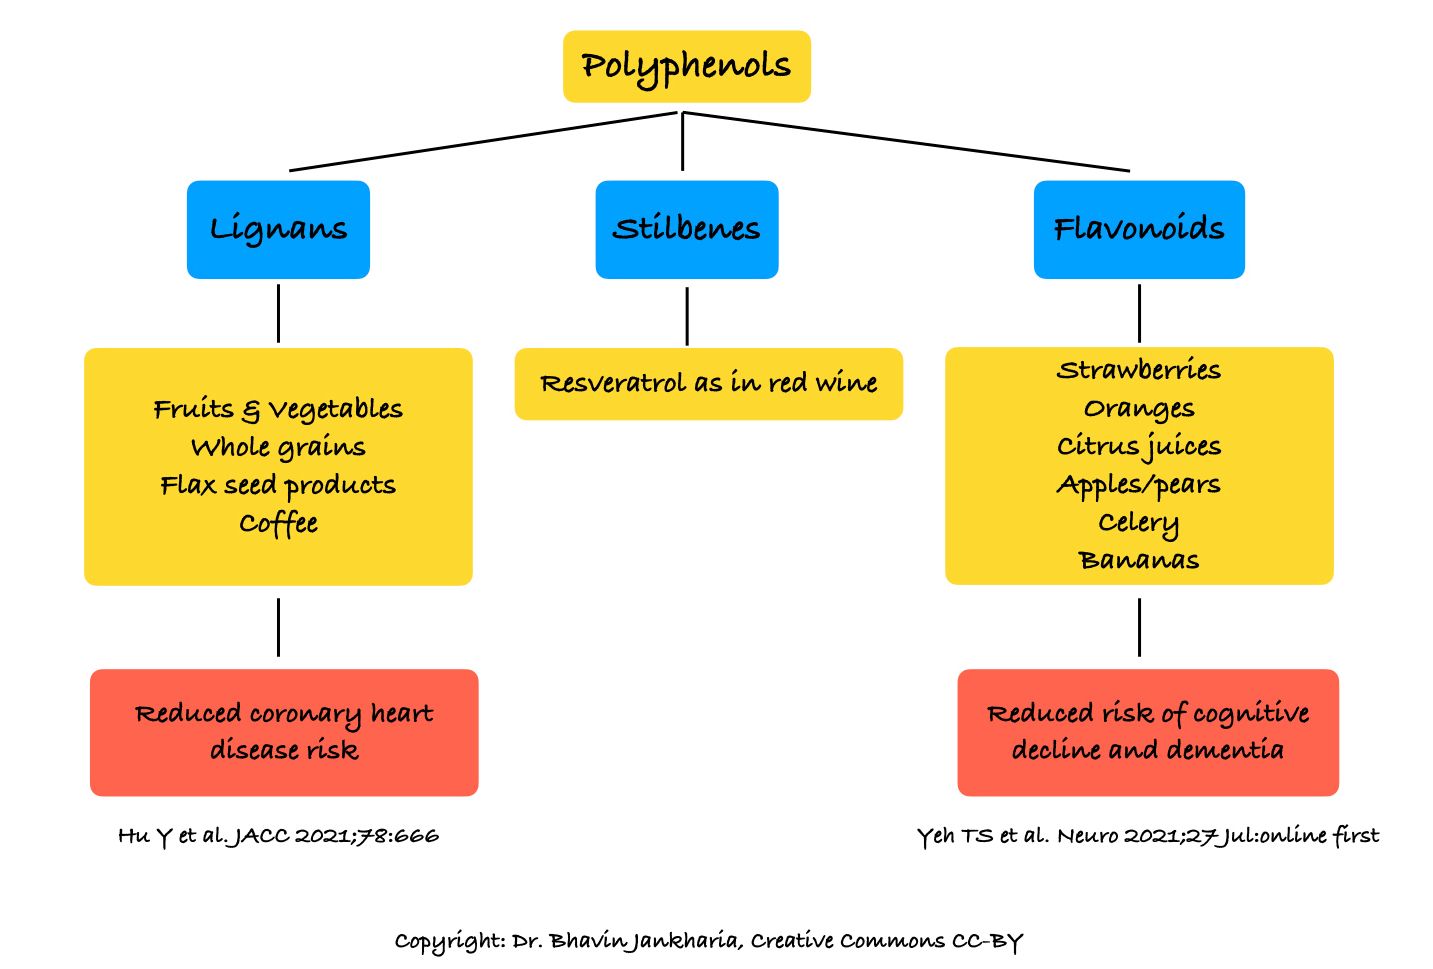 Polyphenols, Cardiovascular Risk and Cognitive Decline